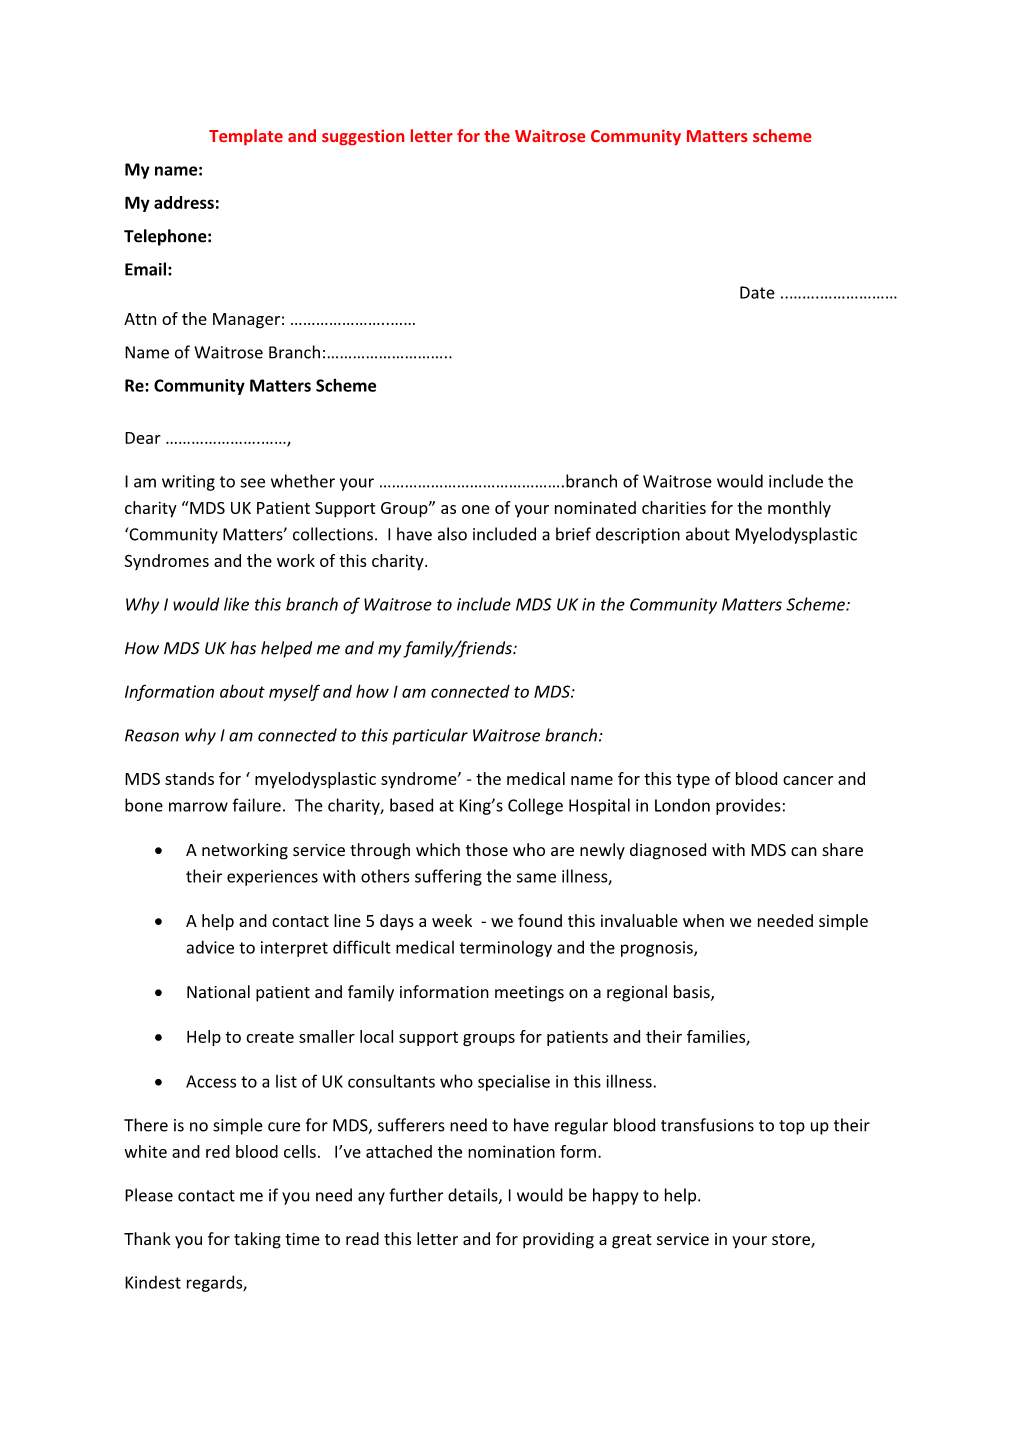 Template and Suggestion Letter for the Waitrose Community Matters Scheme